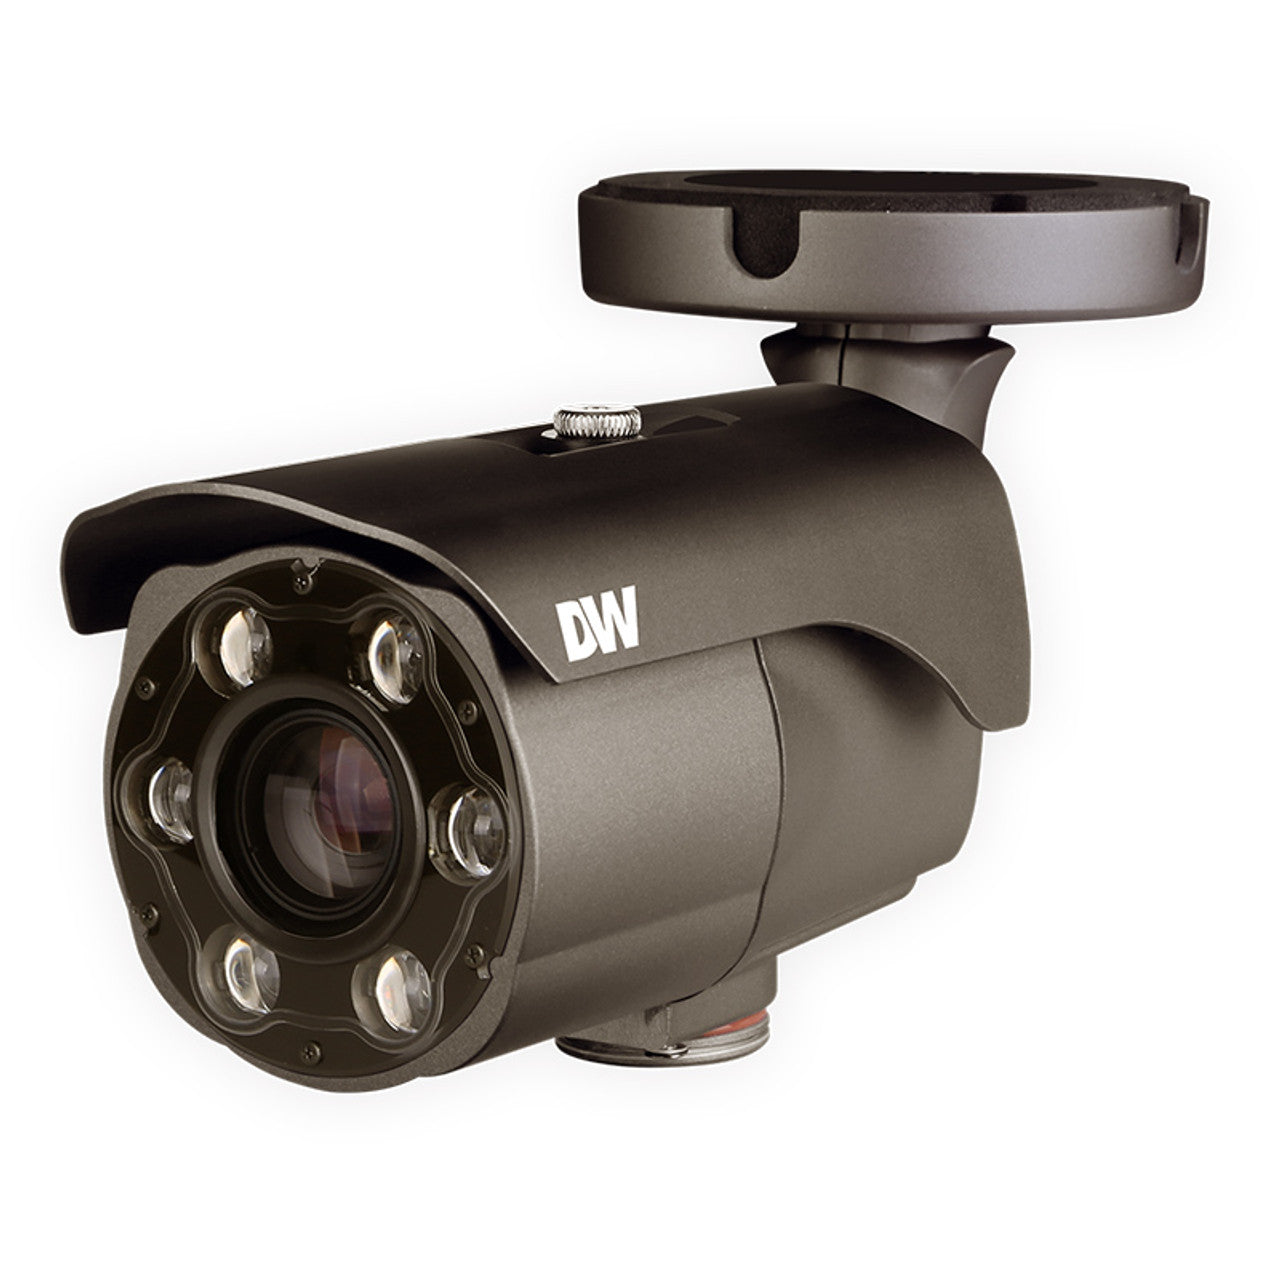 Digital Watchdog DWC-MB45WI650T 5MP H.265 Night Vision Outdoor Bullet IP Security Camera with Motorized Lens